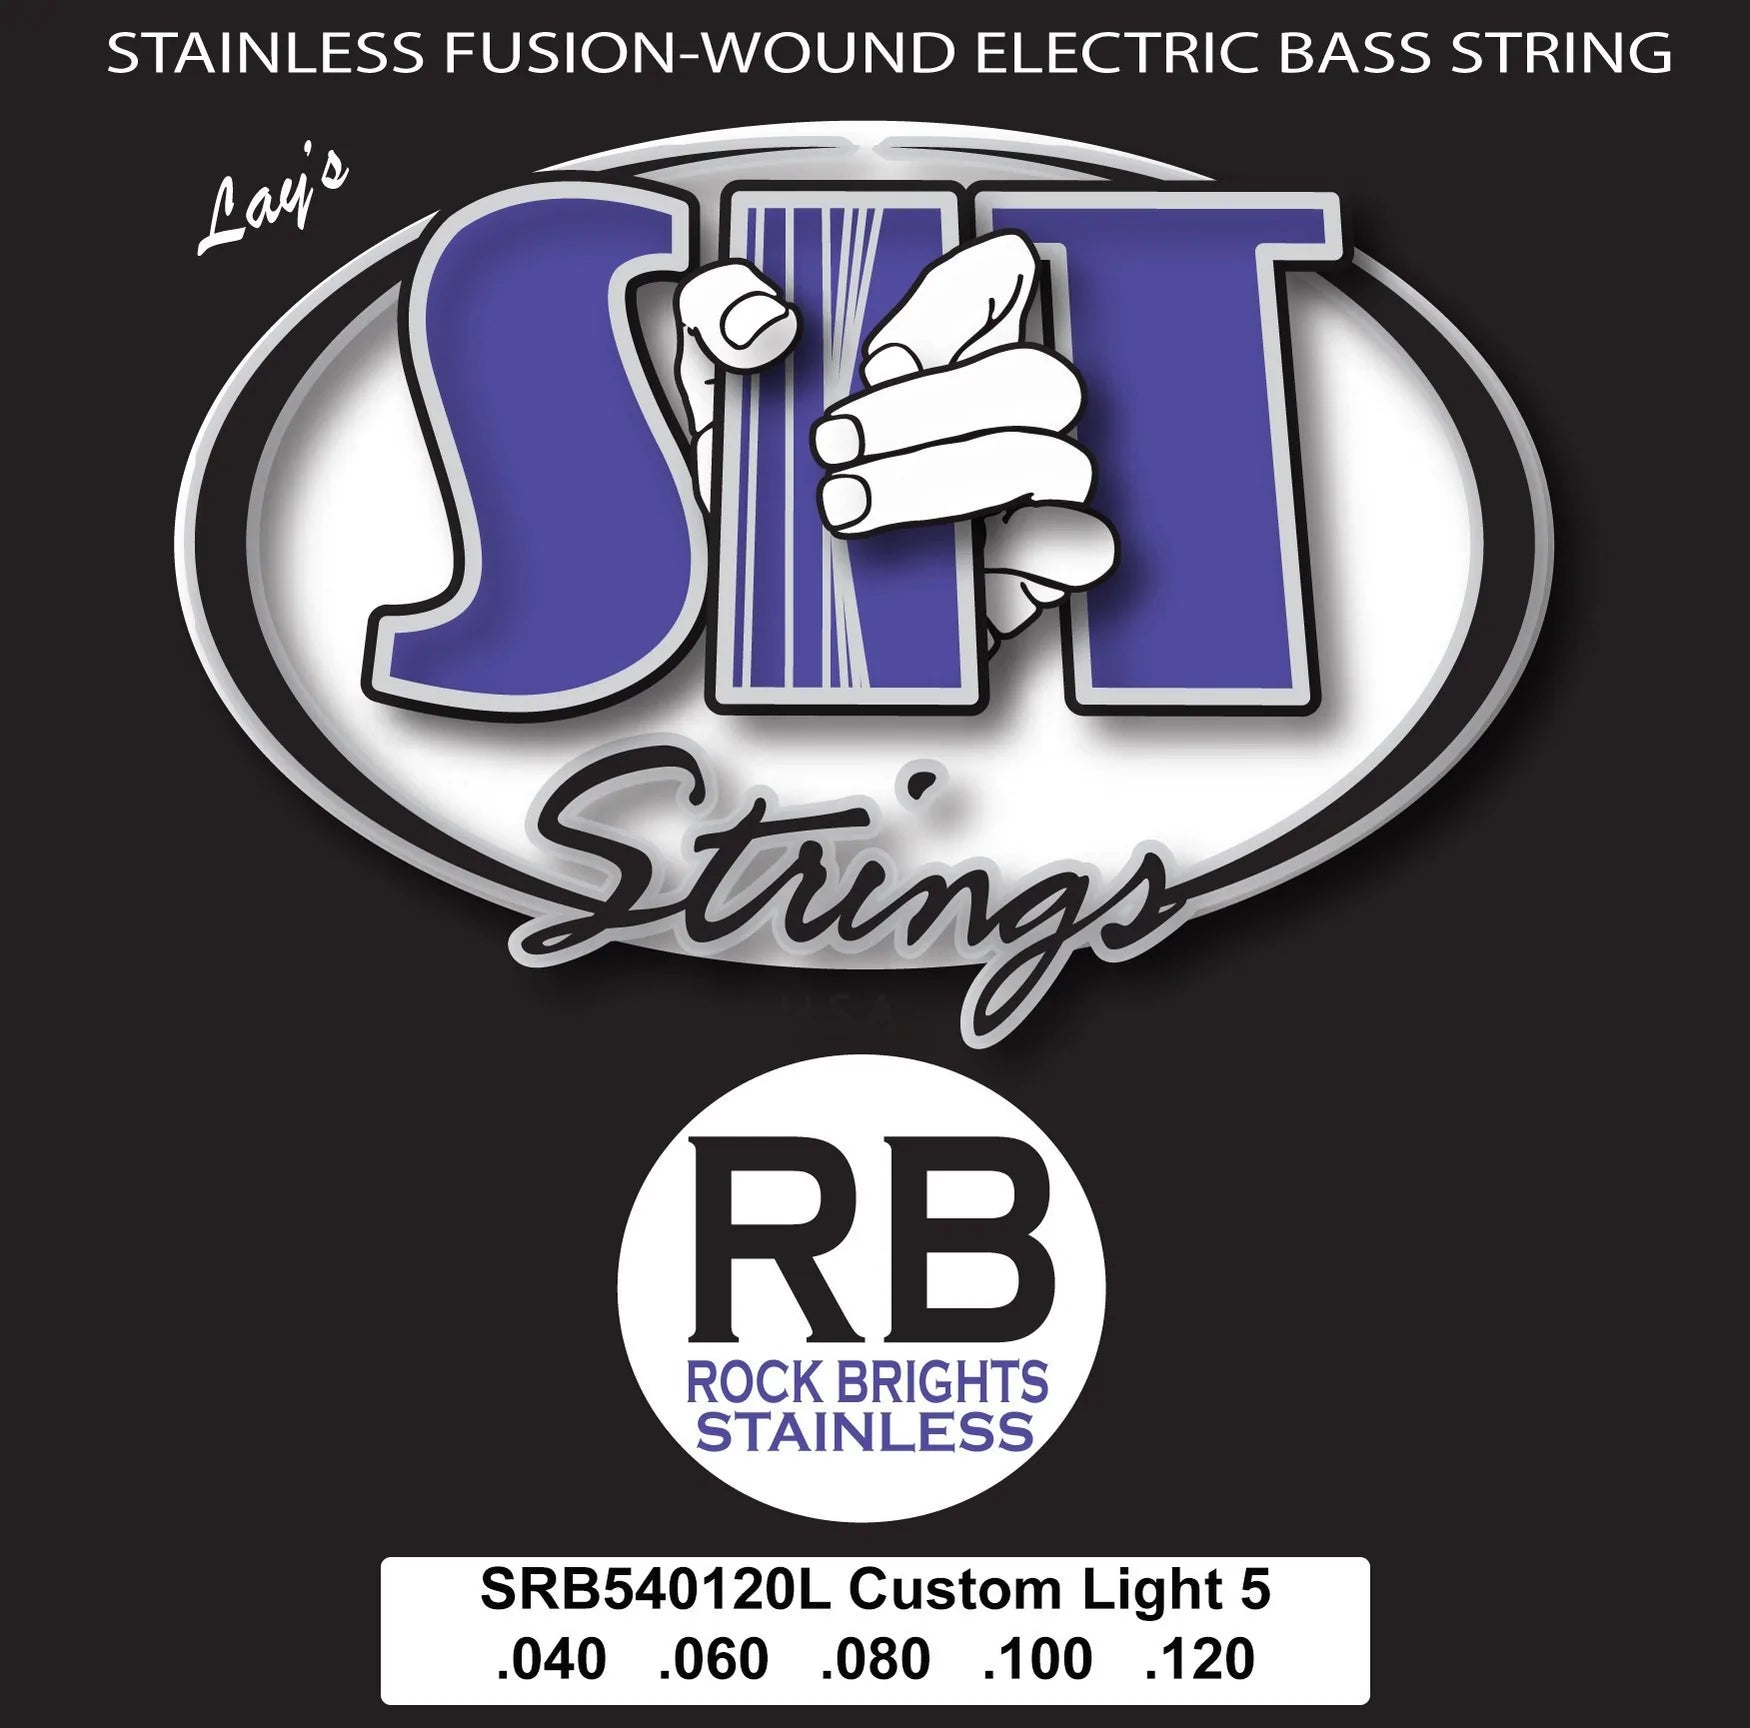 SIT ROCK BRIGHT STAINLESS STEEL BASS - HIENDGUITAR SRB540120L 5-STRING CUSTOM LIGHT SRB540120L 5-STRING CUSTOM LIGHT SIT Bass Strings